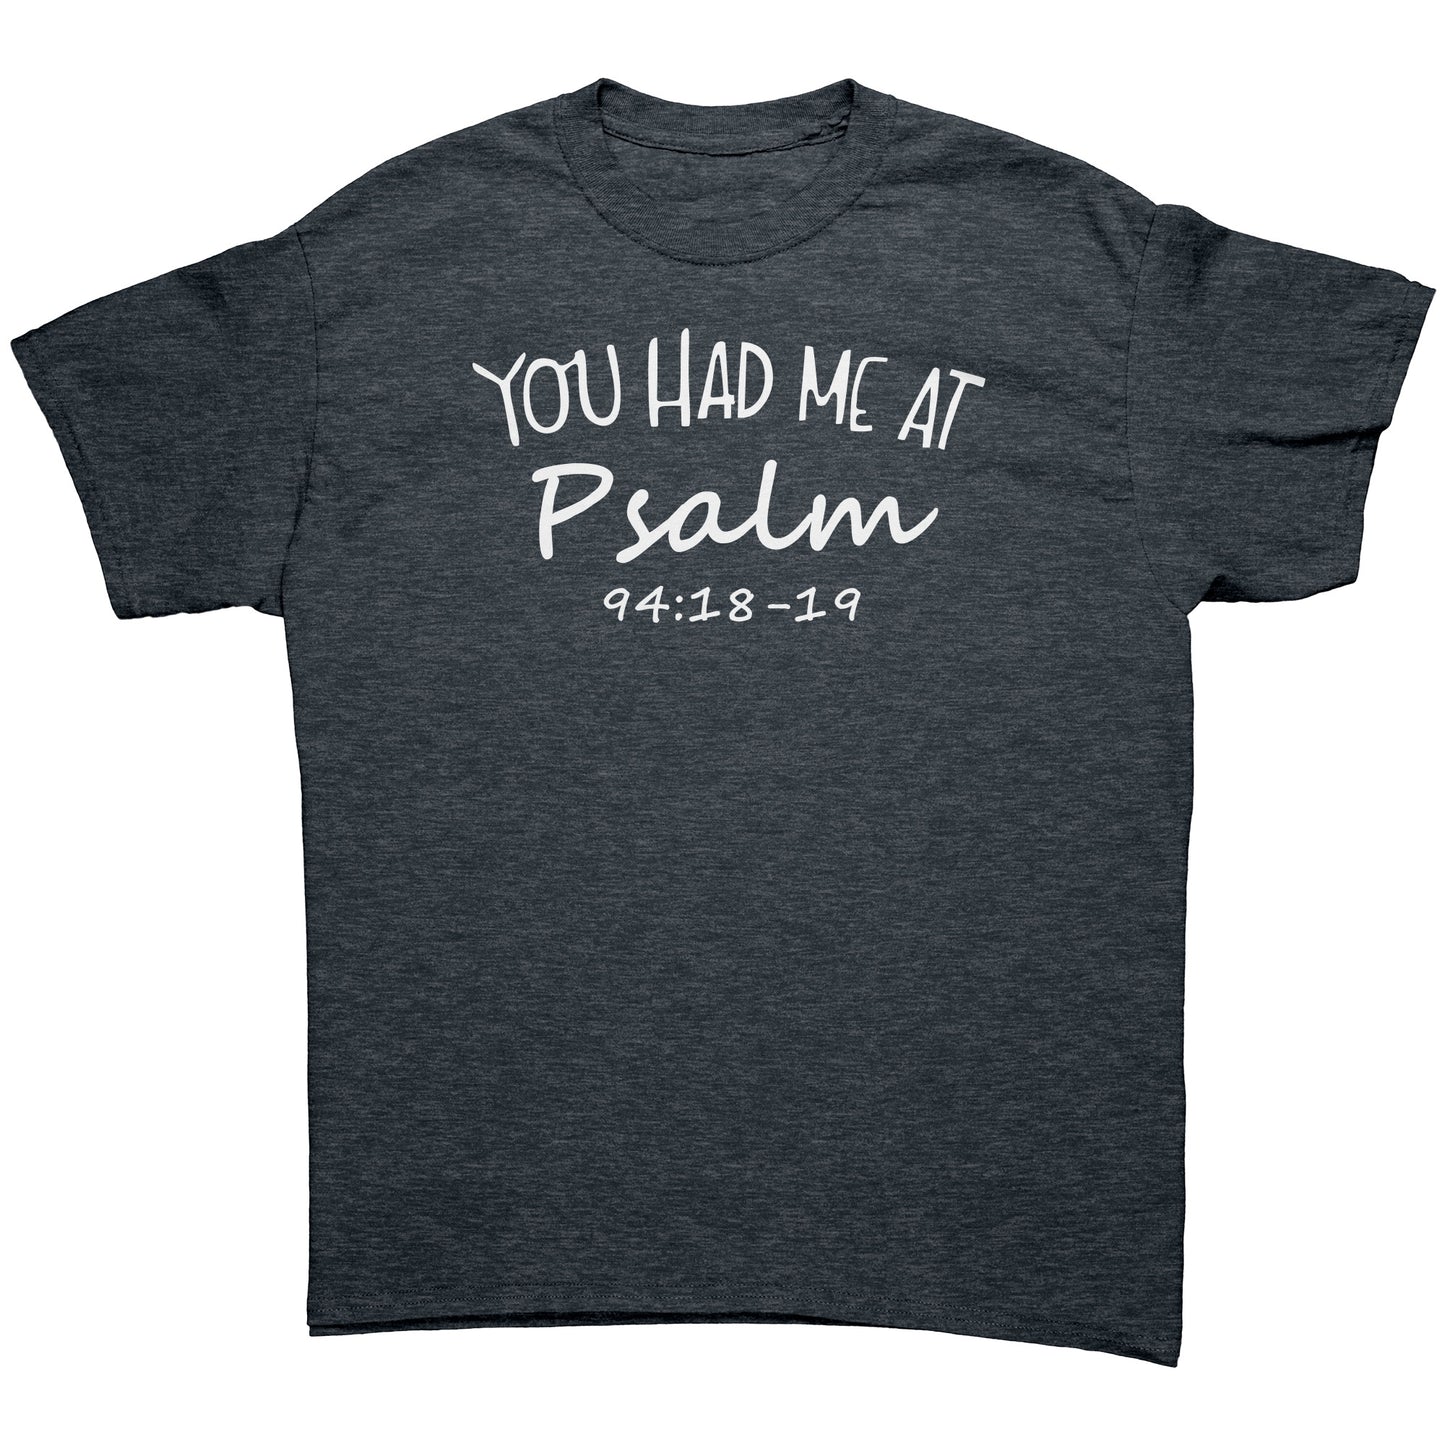 You Had Me At Psalm 94:18-19 Men's T-Shirt Part 2